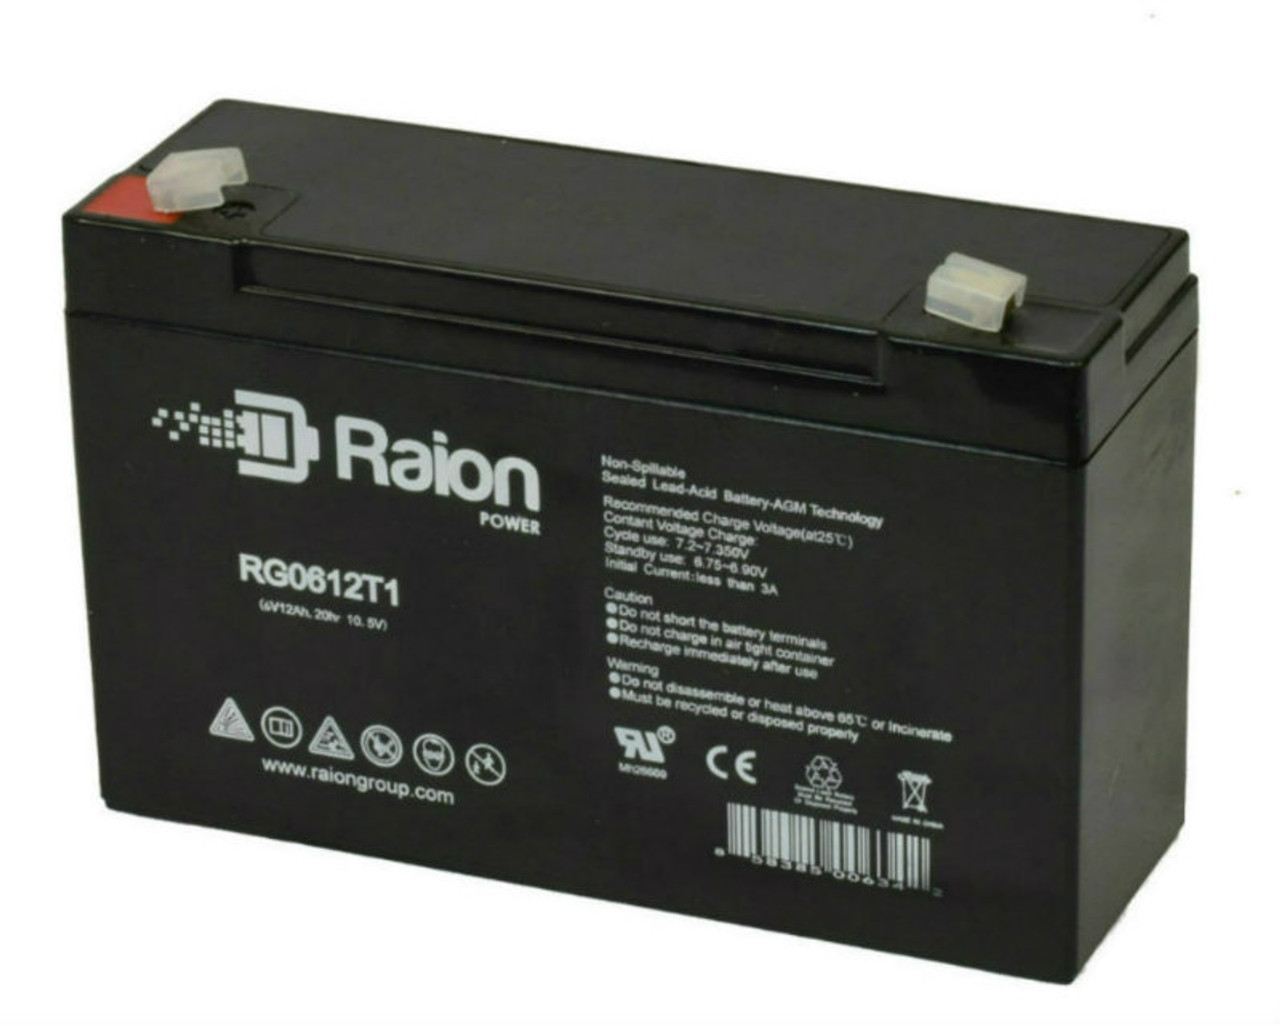 Raion Power RG06120T1 Replacement 6V 12Ah Emergency Light Battery for Power Mate PM6100/PM6120